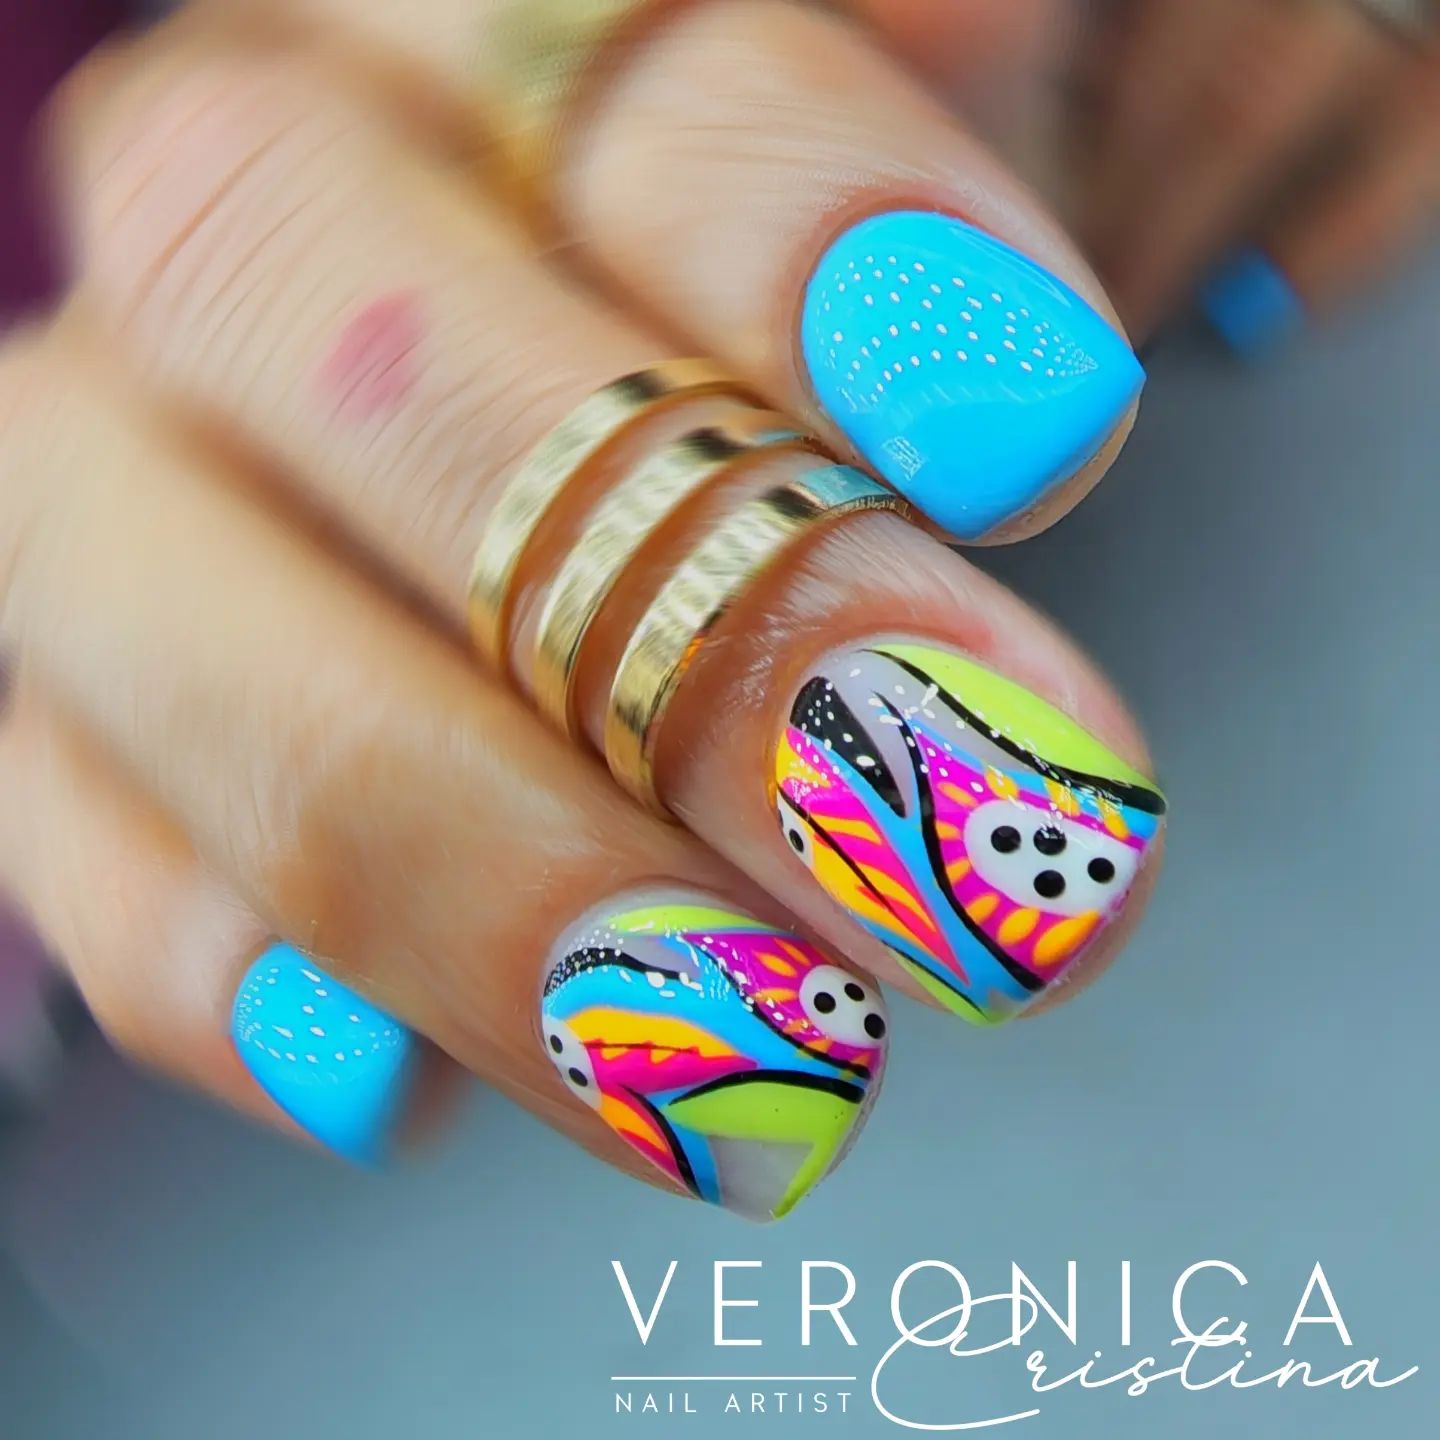 Abstract nail design is great way to express yourself through your nails. All you need to do is apply a bright turquoise nail polish and a colorful abstract nail design to your accent nails.